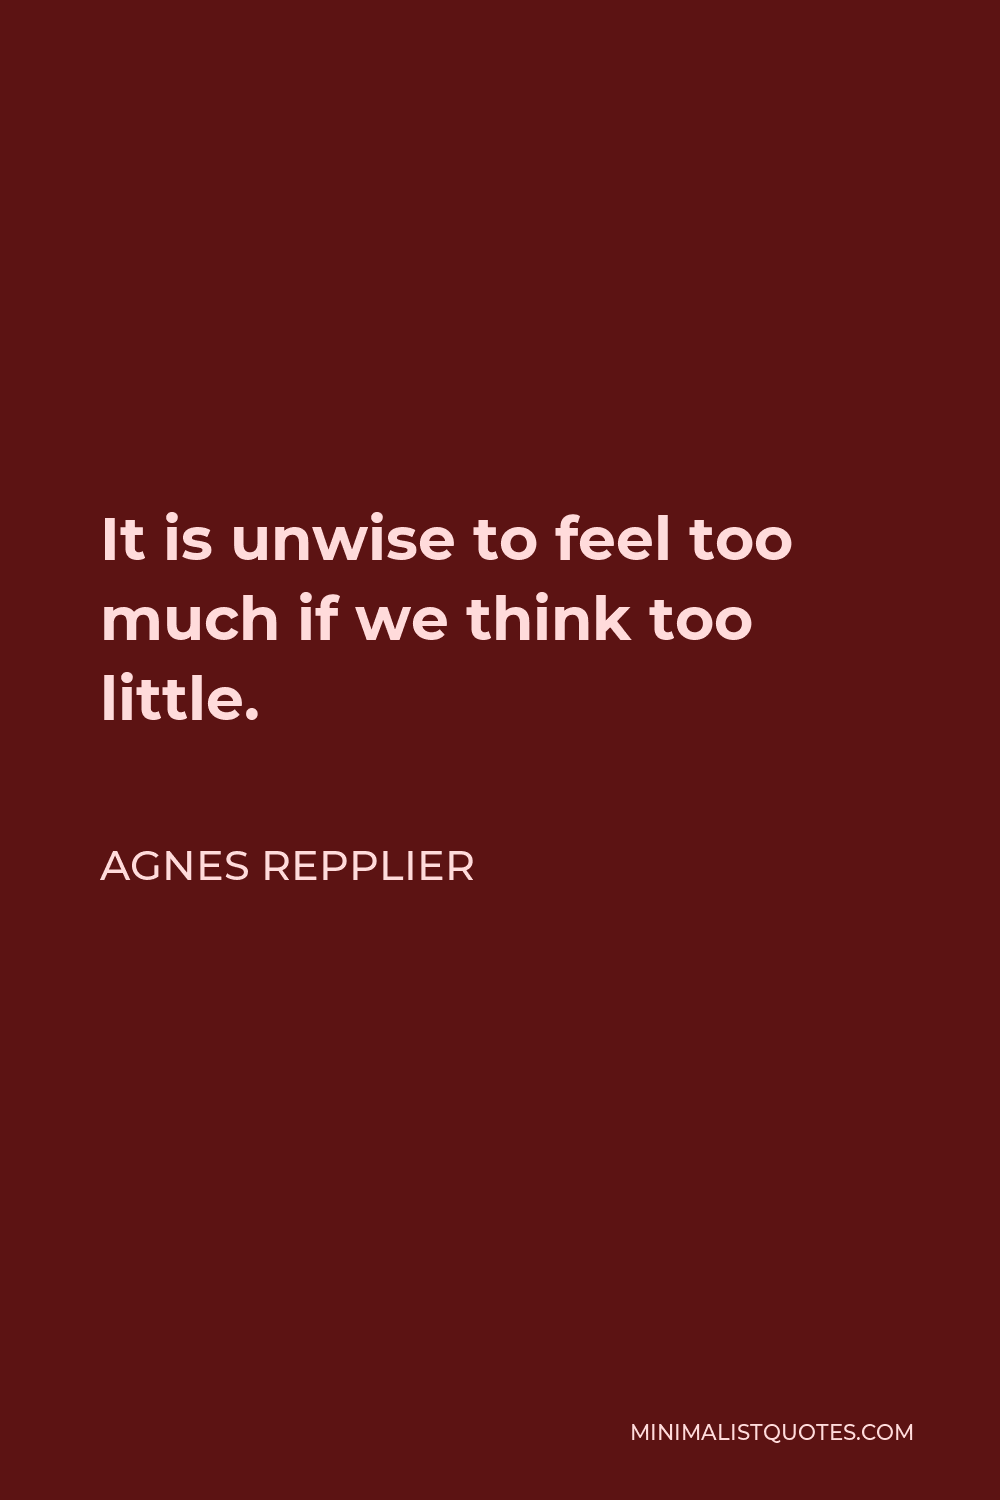 Agnes Repplier Quote - It is unwise to feel too much if we think too little.